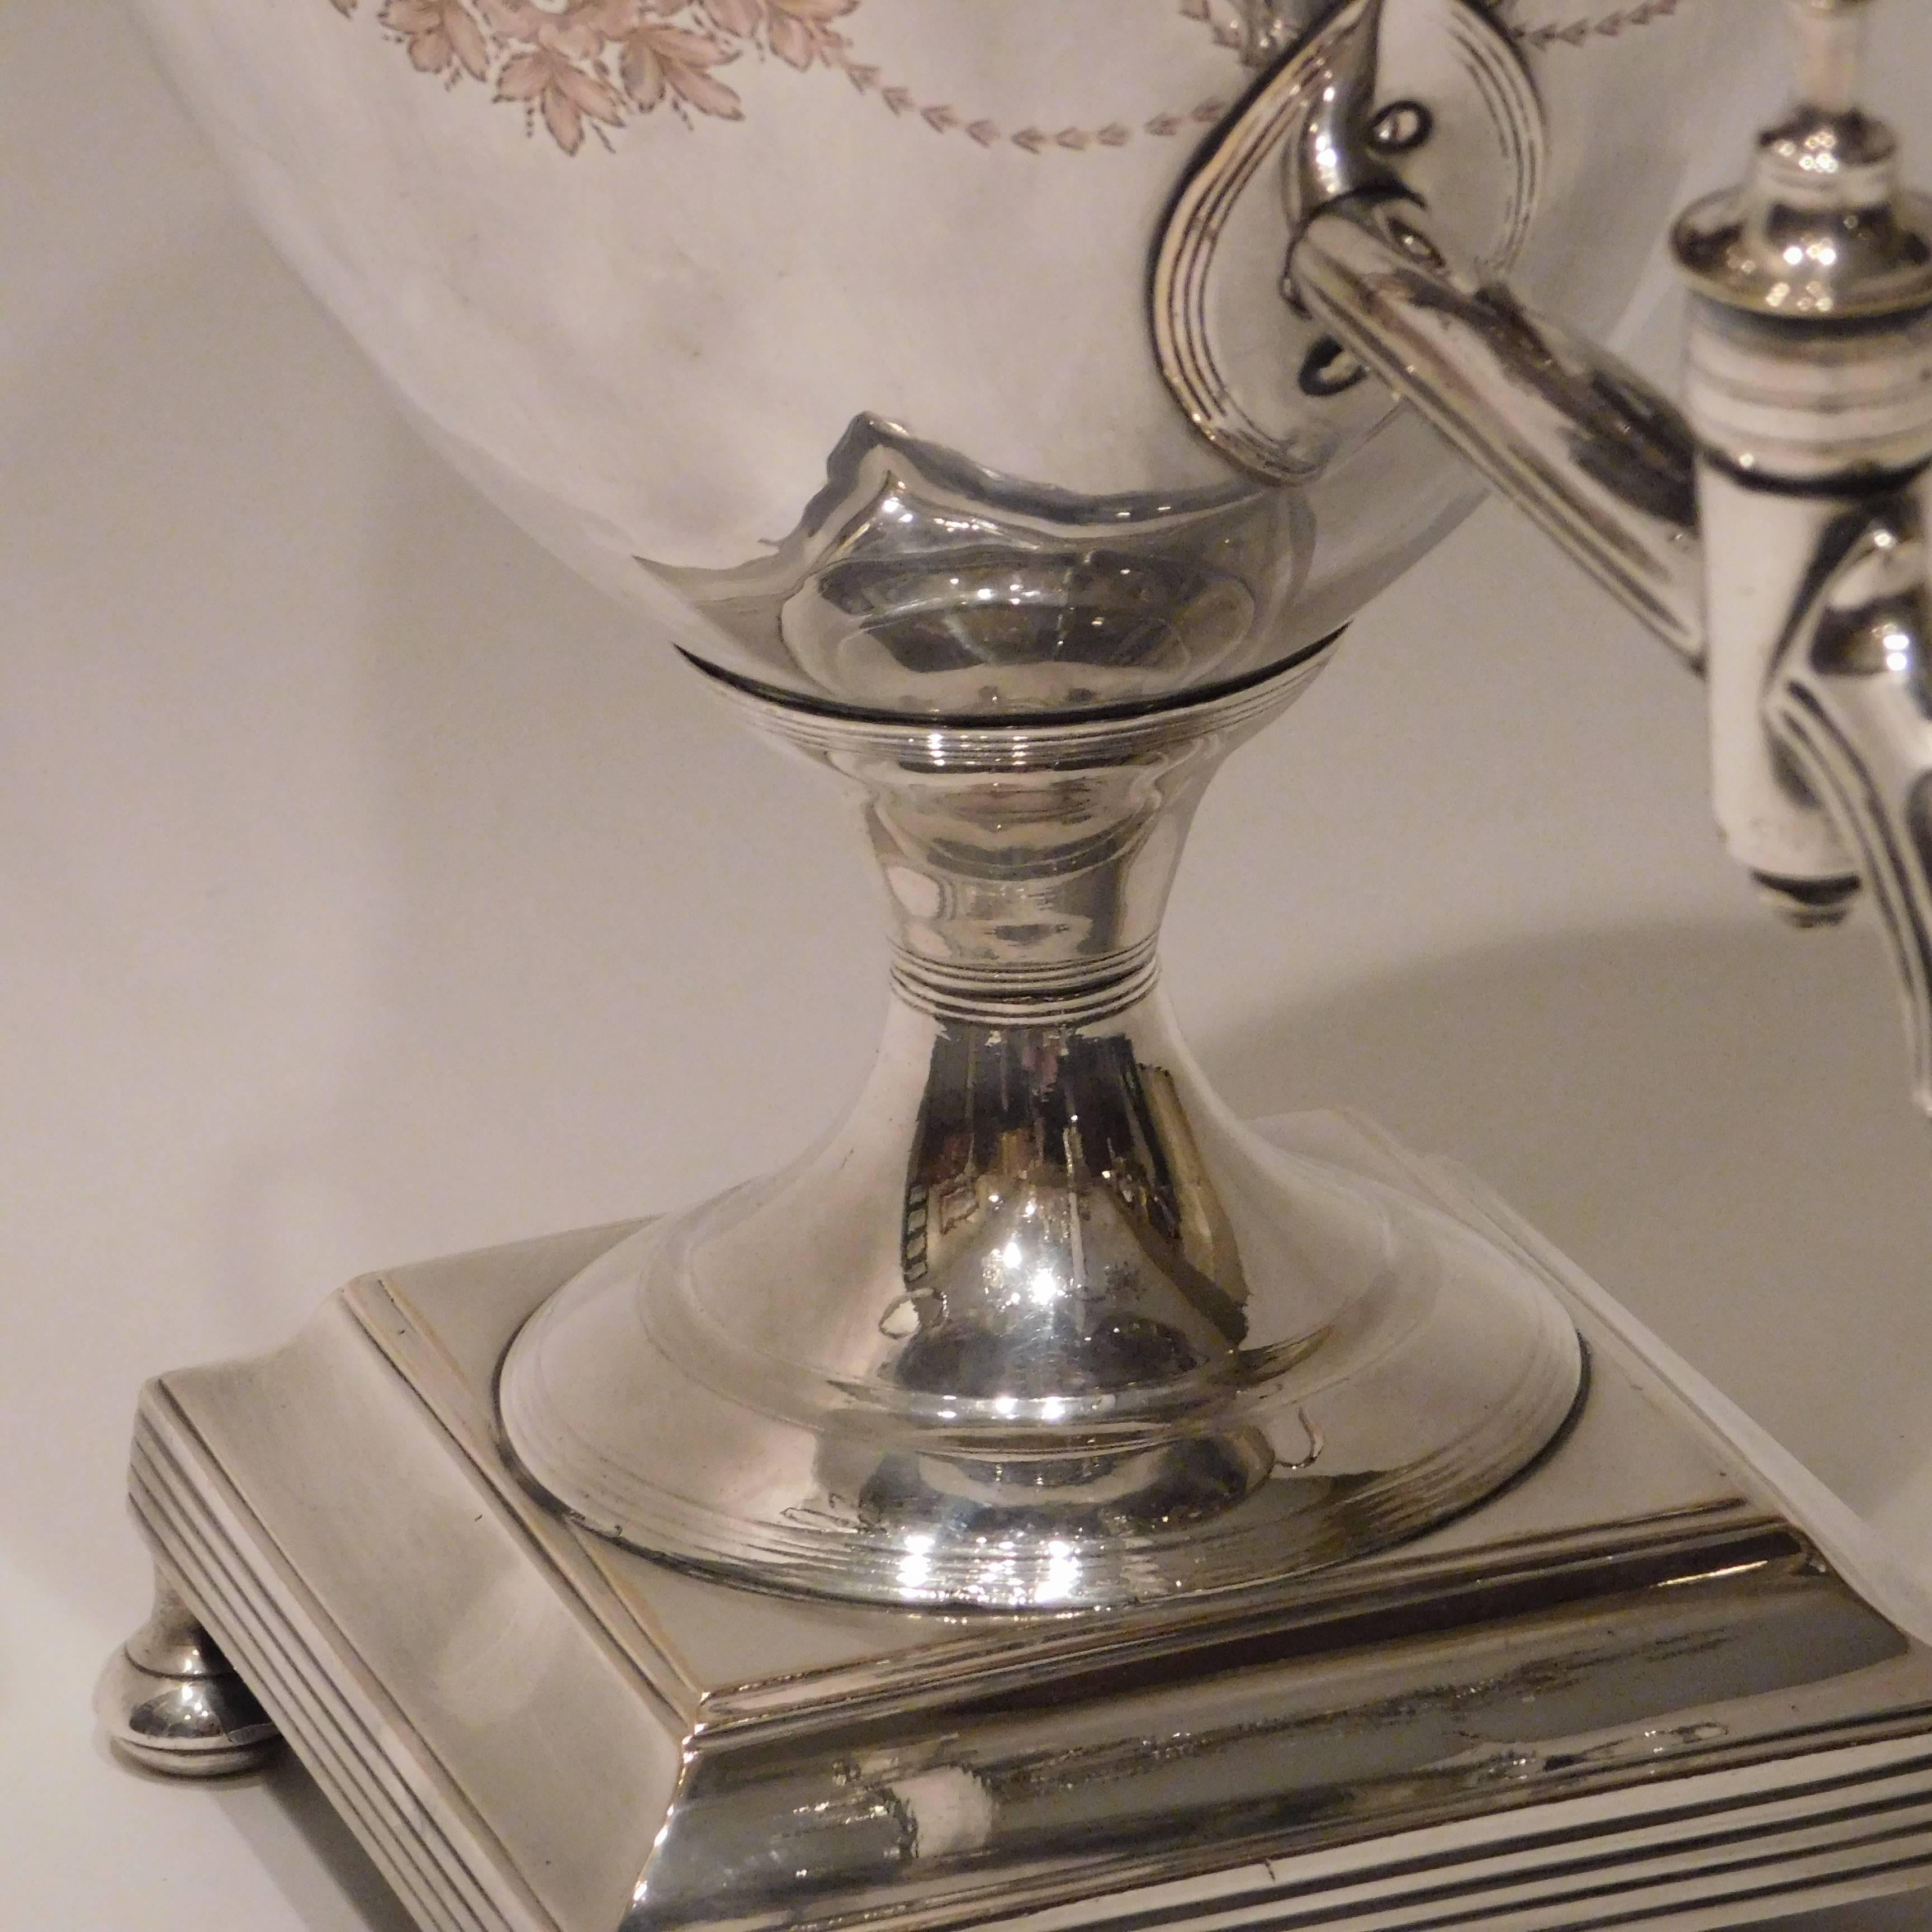 This silver on copper urn looks like it just came out of Downton Abbey, excellent hand chasing, neoclassic design.